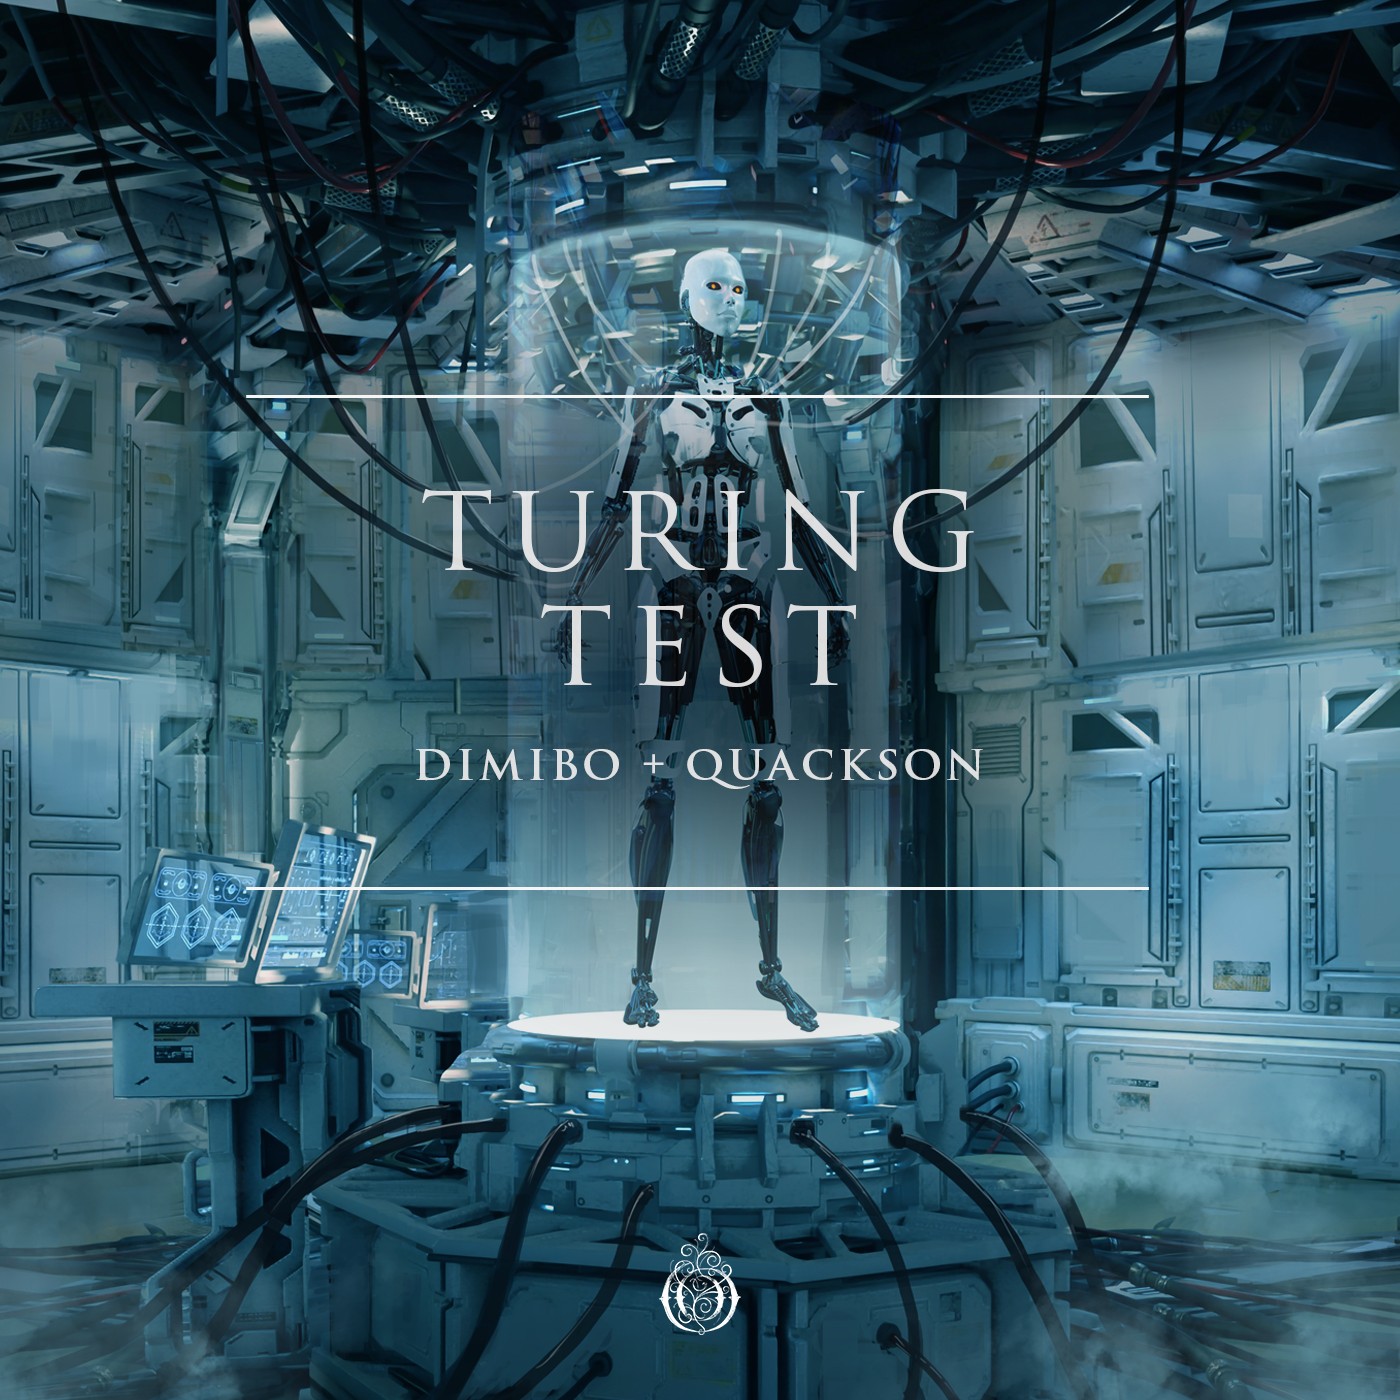 FEATURED LOCAL MUSIC: Turing Test by Dimibo & Quackson